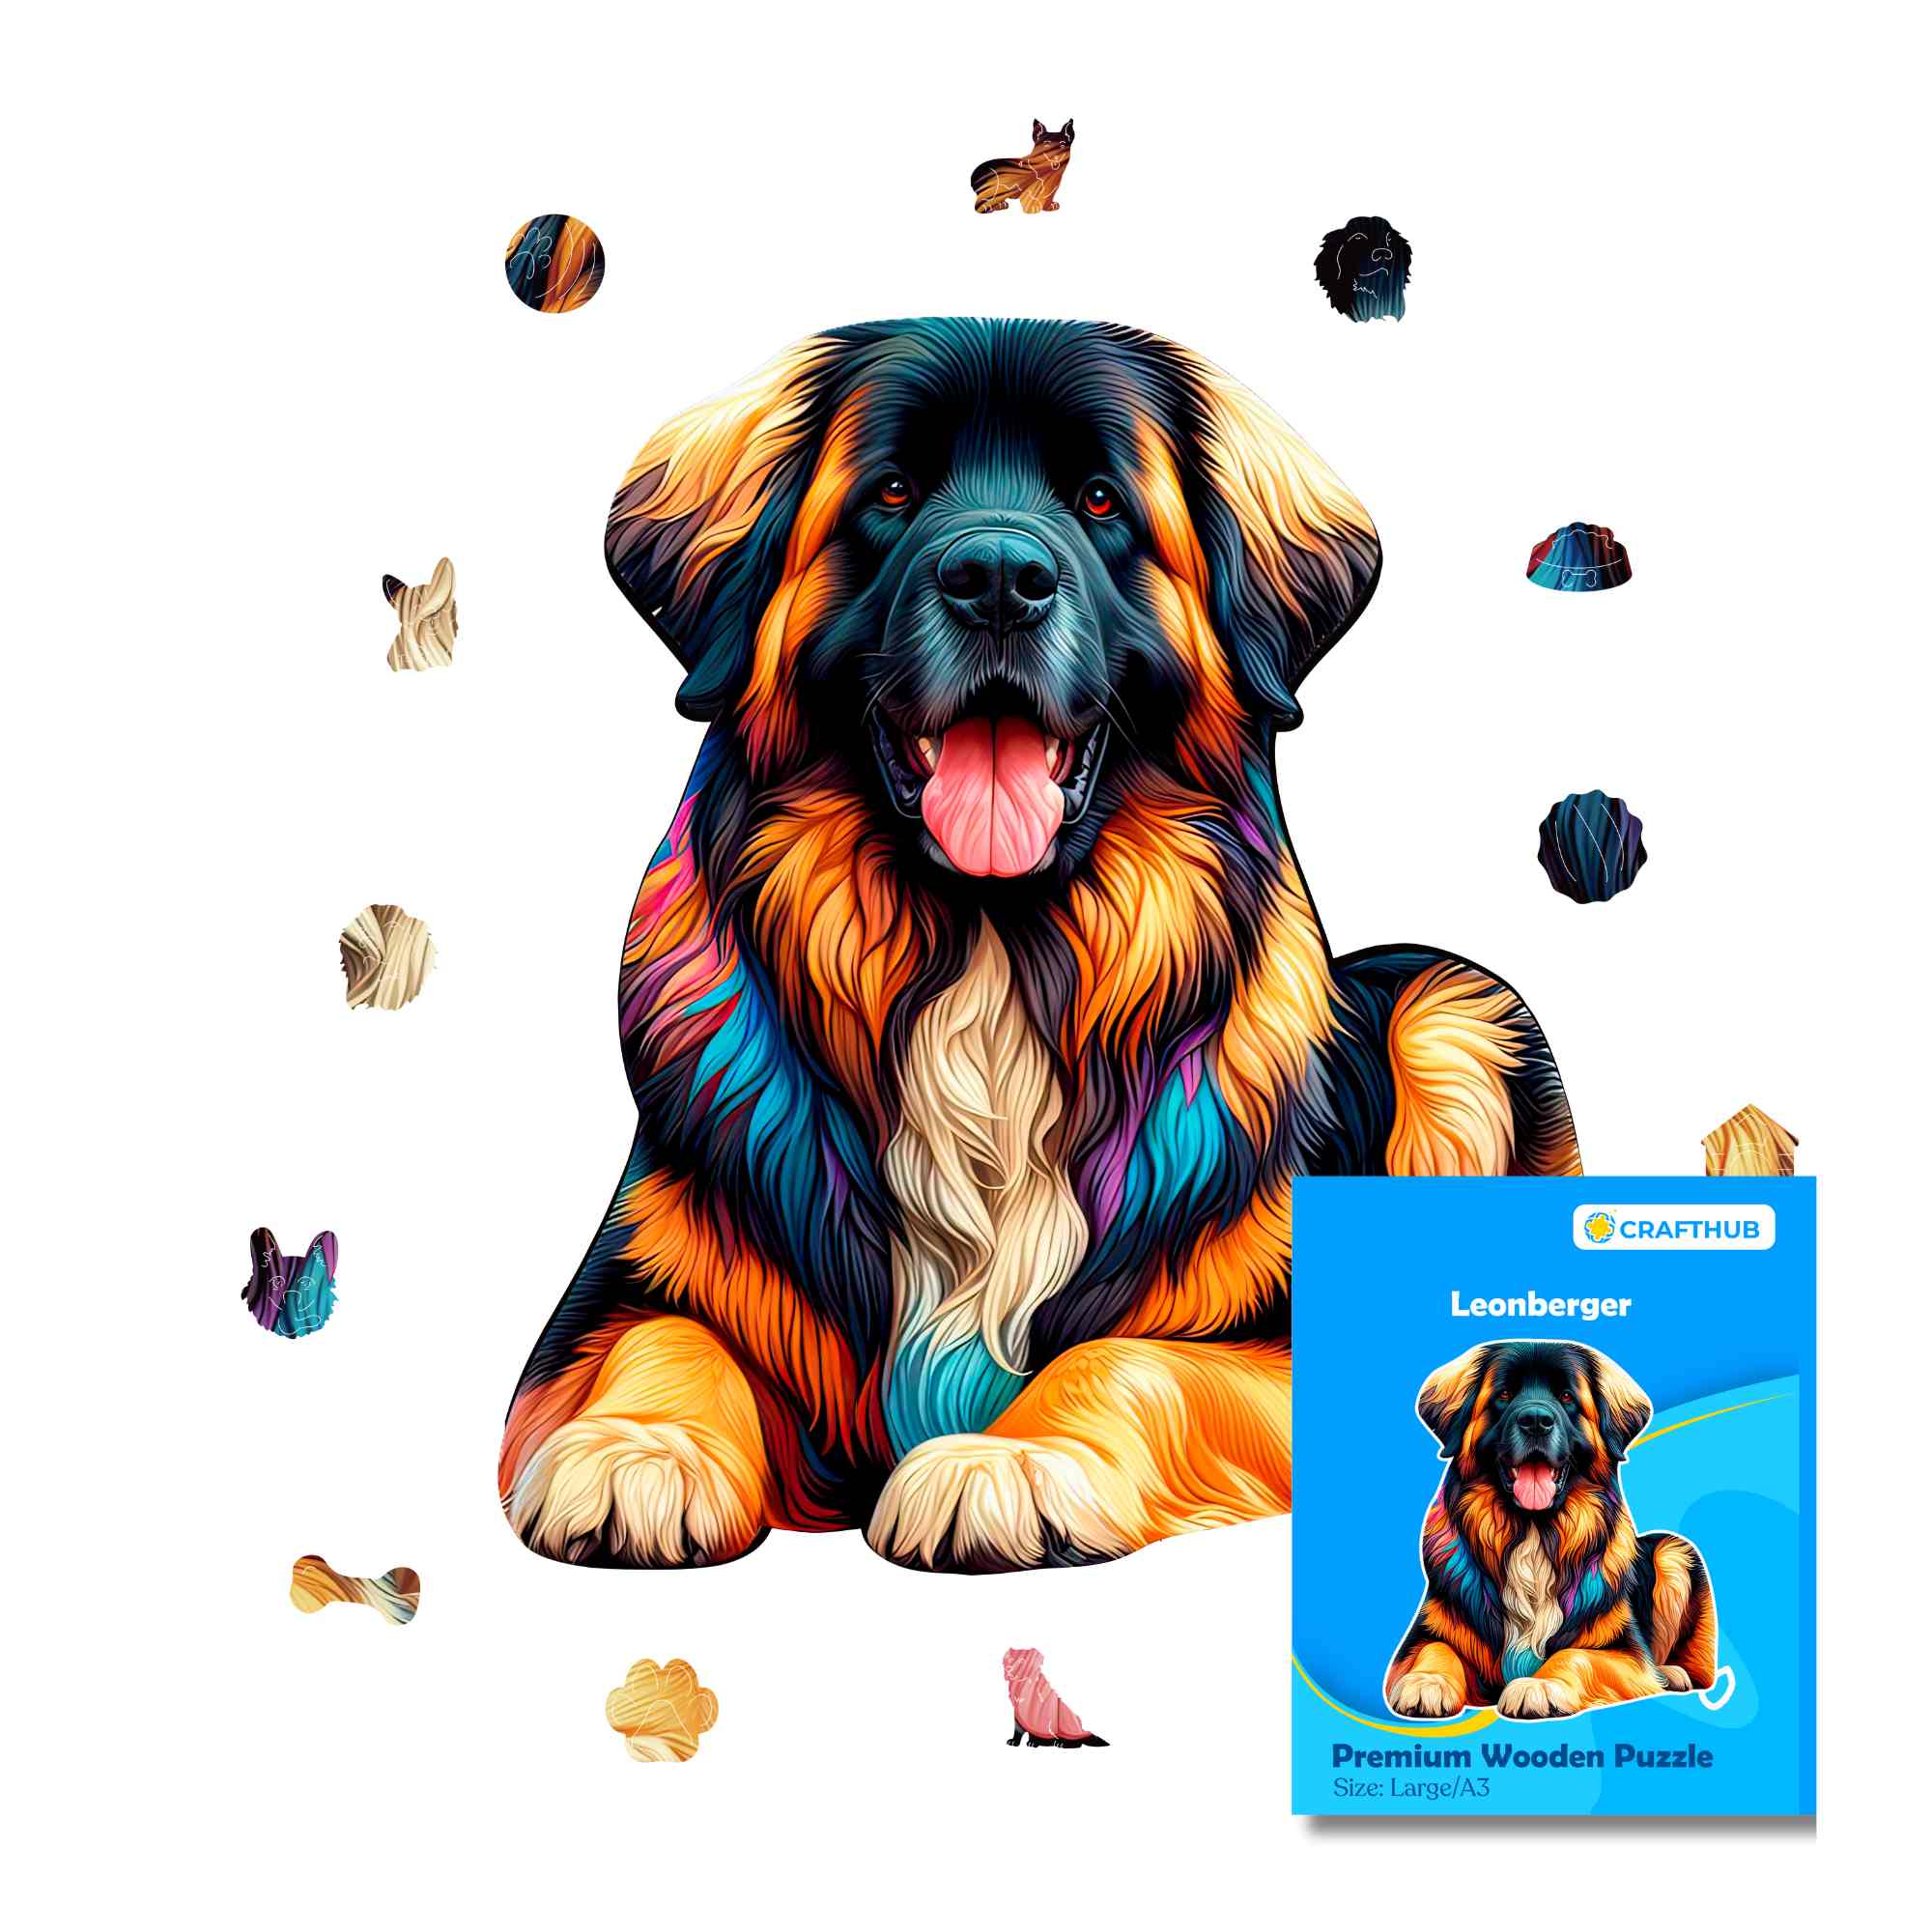 Animal Jigsaw Puzzle > Wooden Jigsaw Puzzle > Jigsaw Puzzle A4 Leonberger Dog - Jigsaw Puzzle